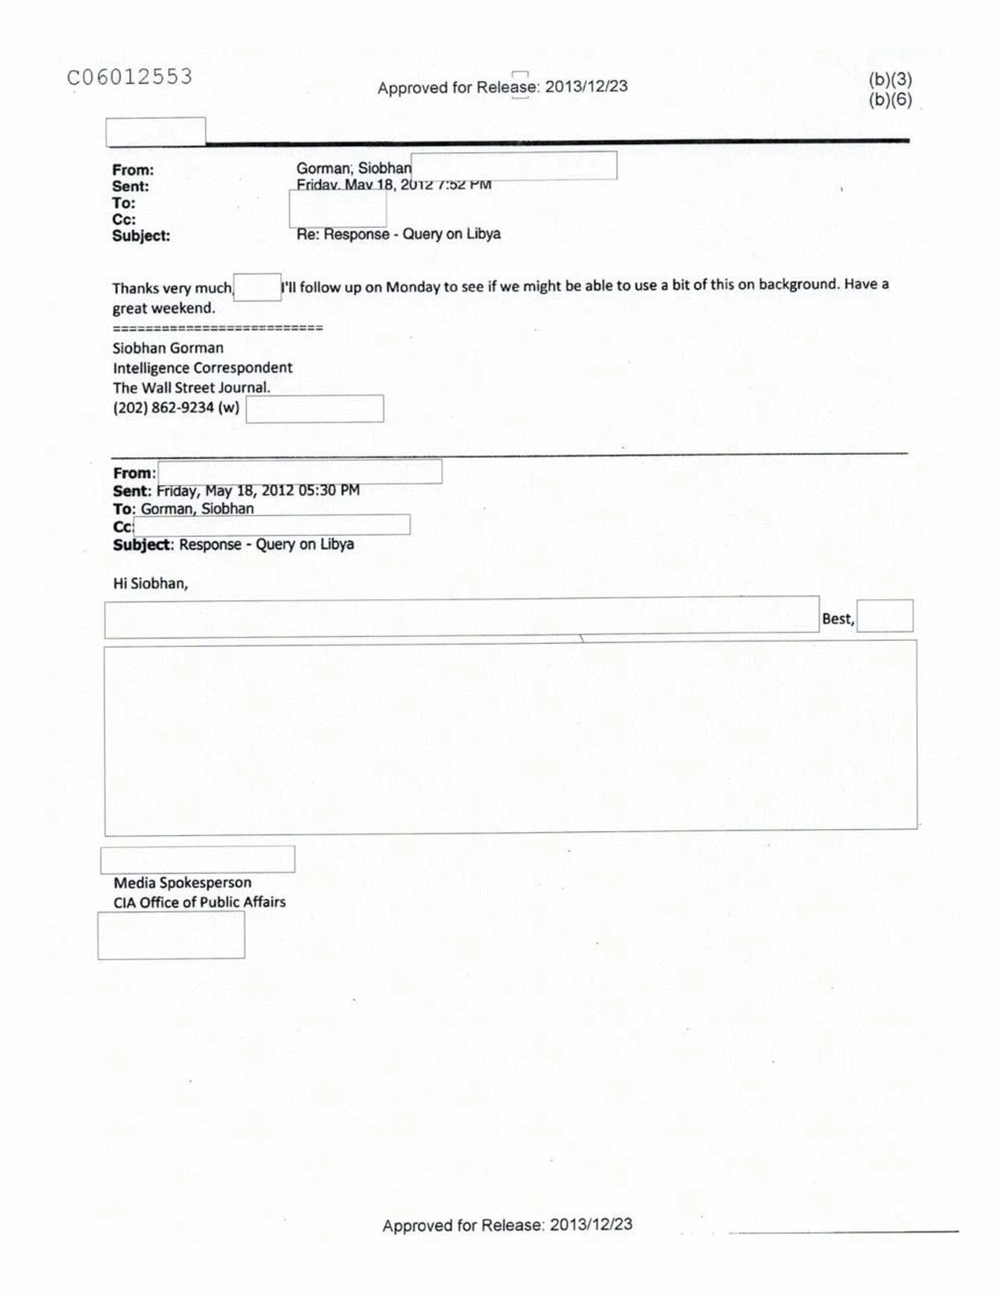 Page 90 from Email Correspondence Between Reporters and CIA Flacks